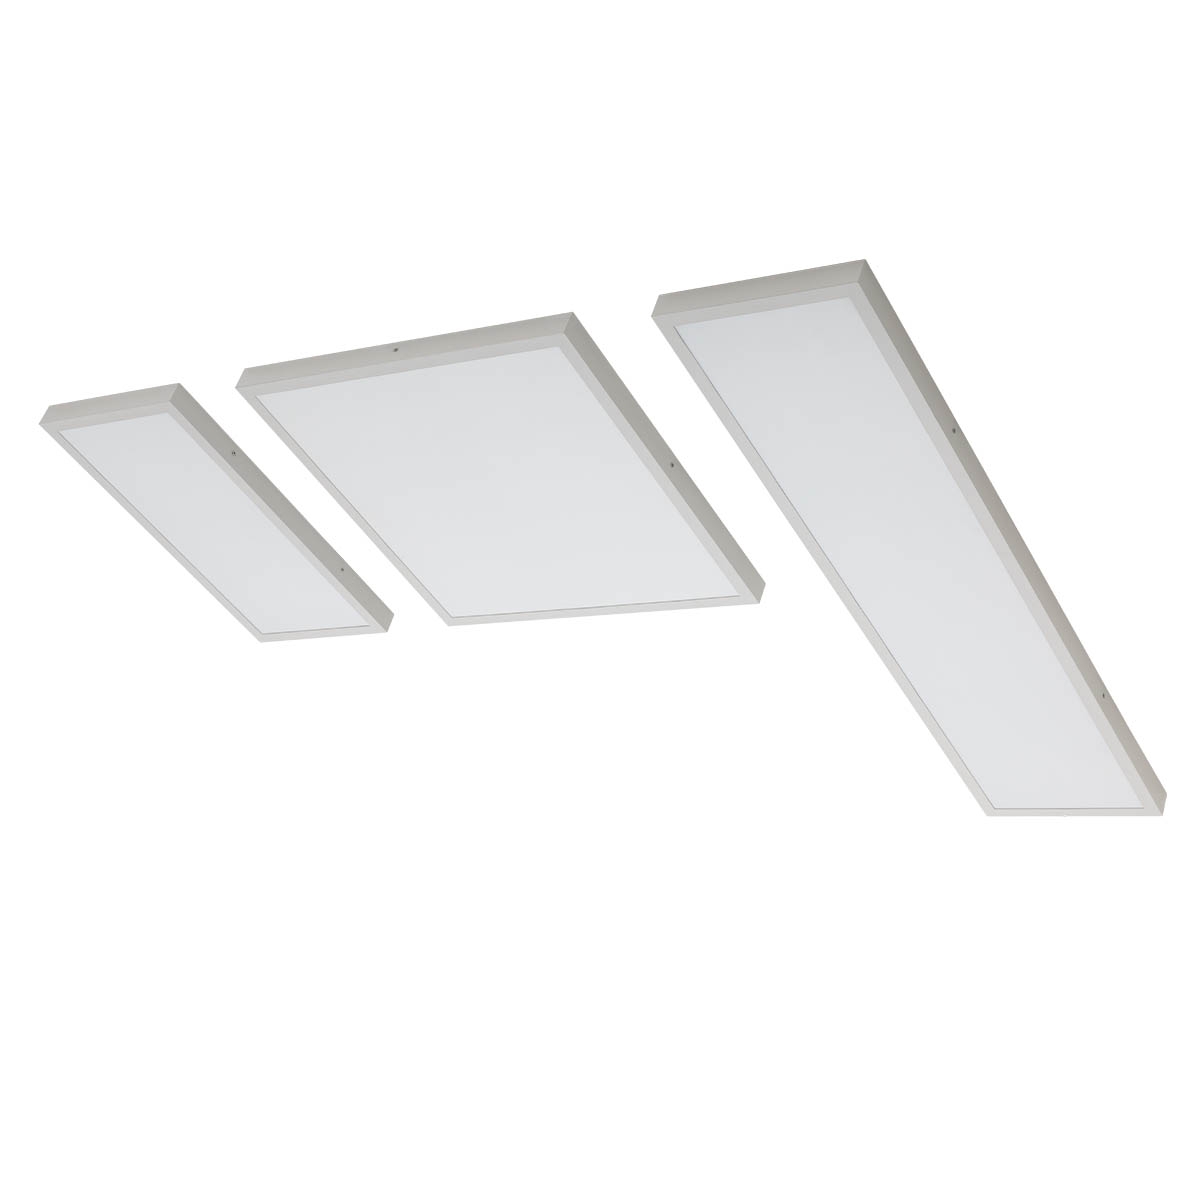 SURFACE AND WALL RECESSED LIGHT FITTINGS